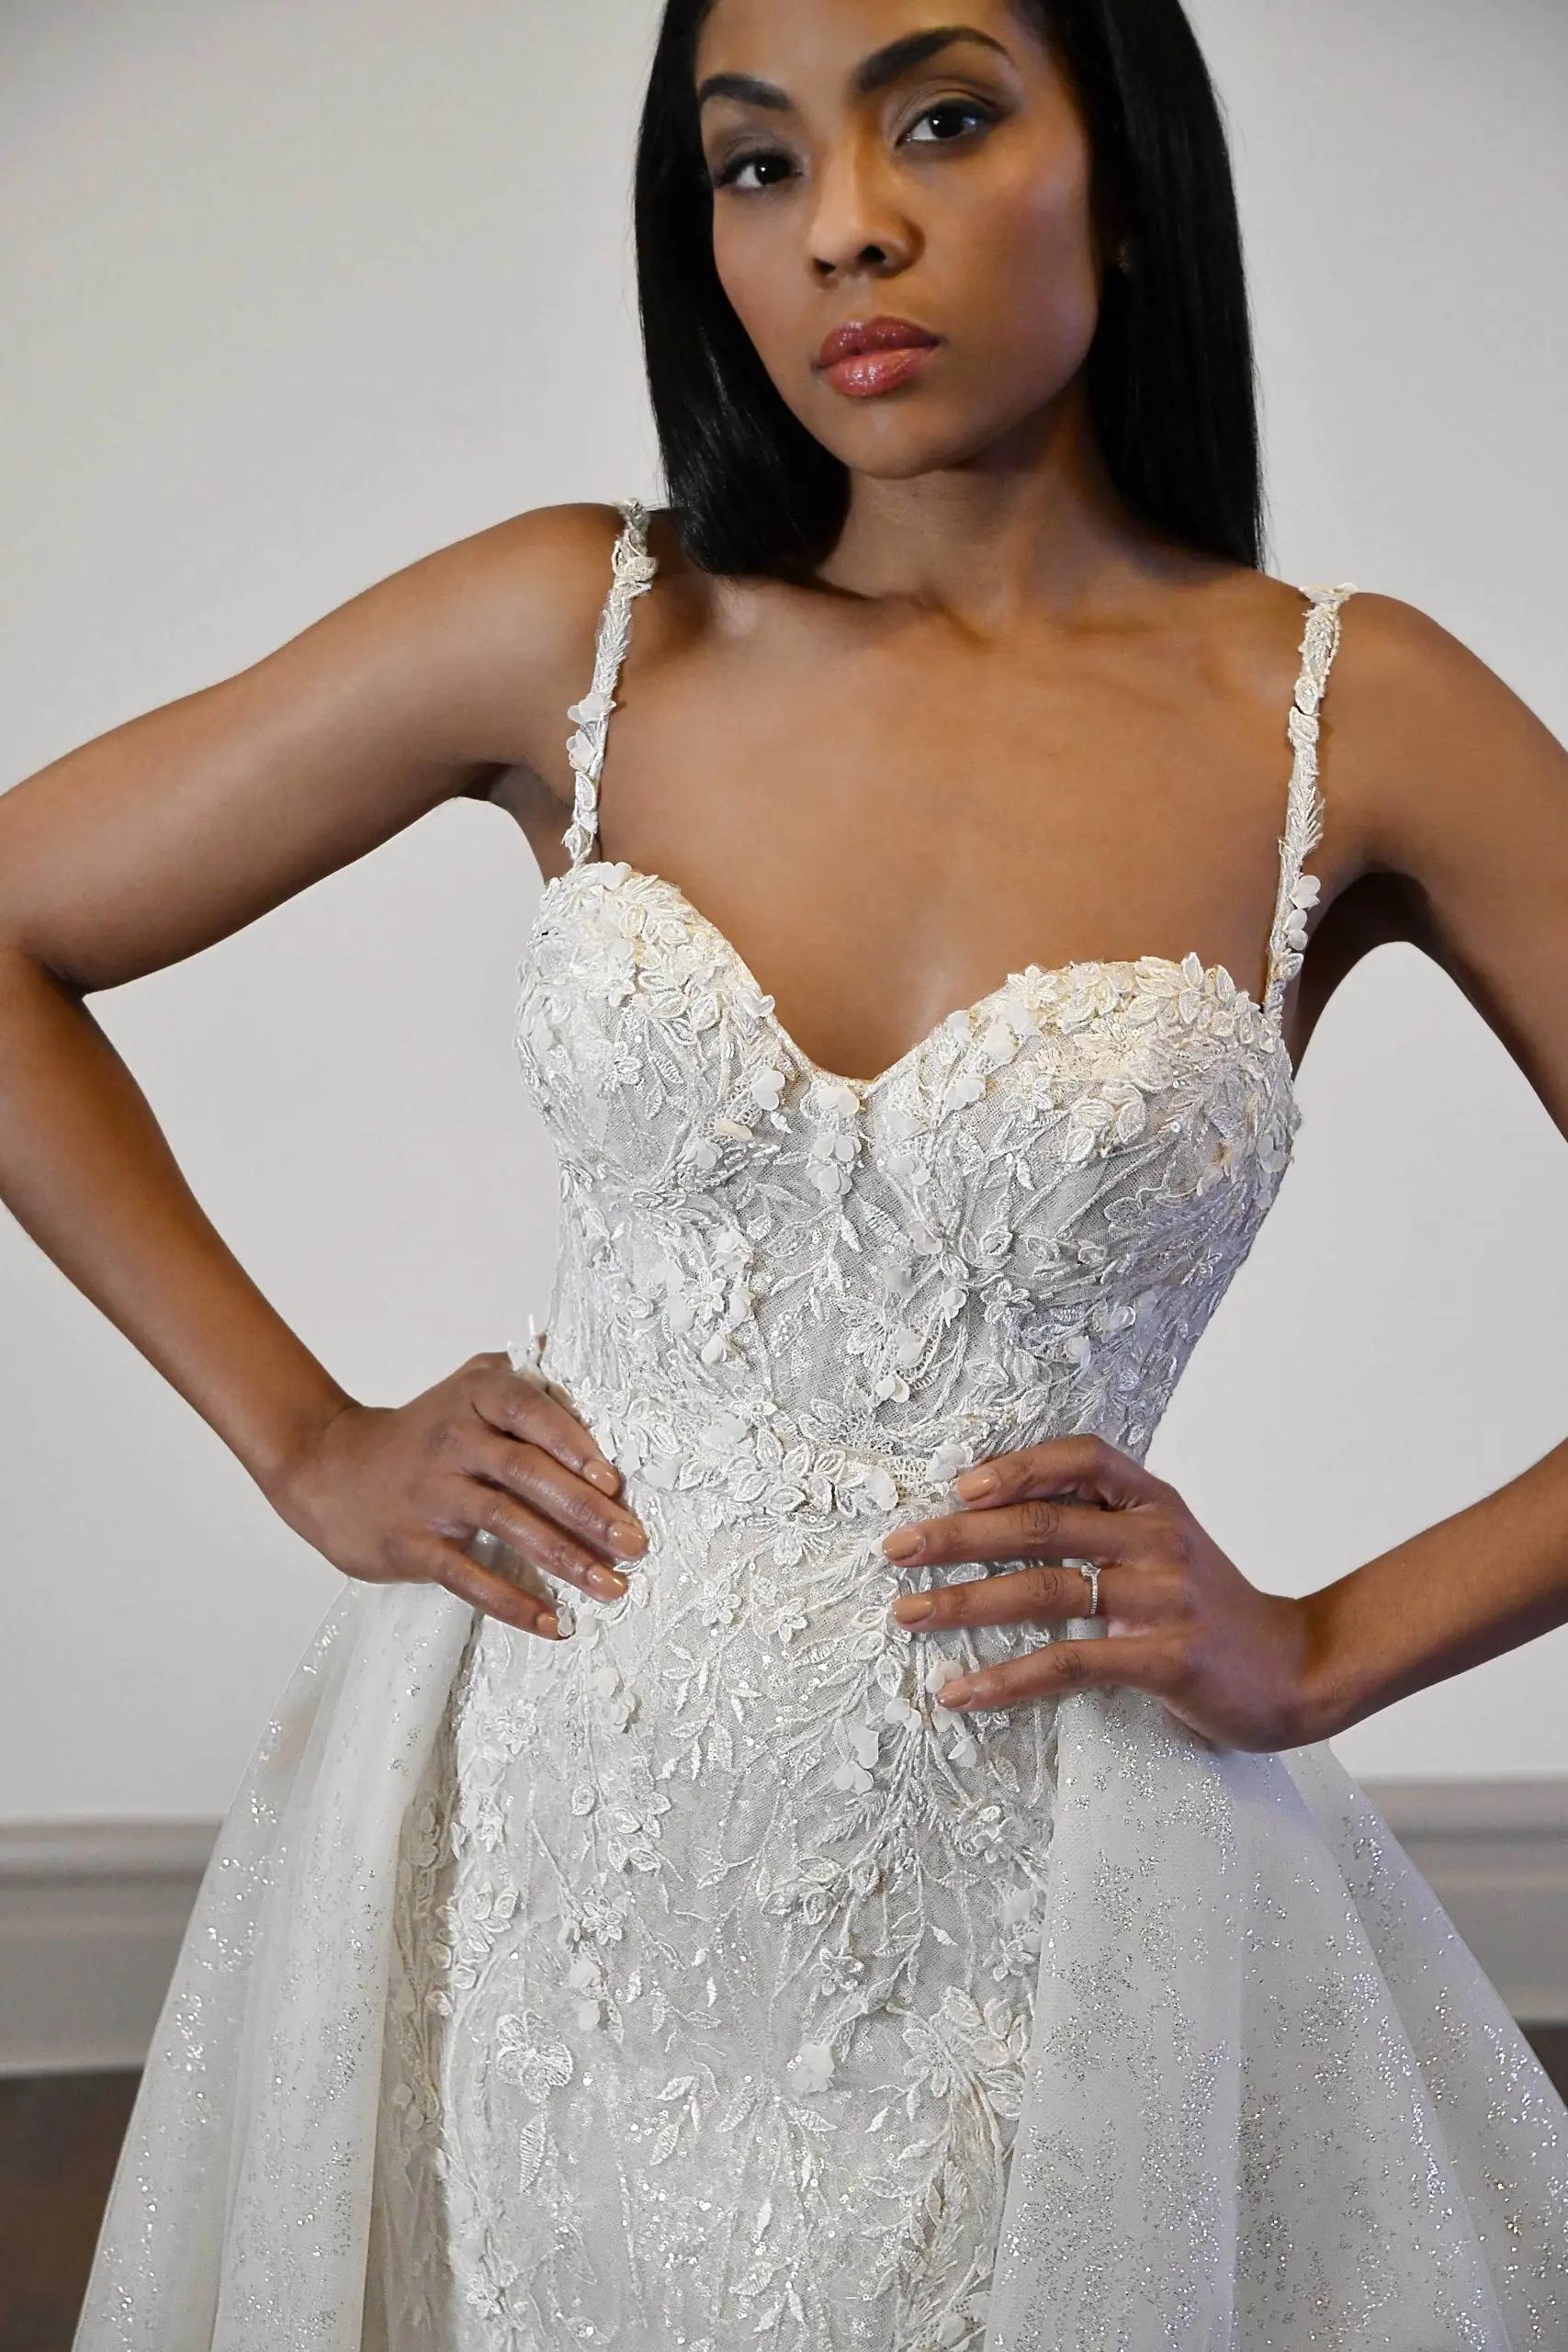 Model wearing a Couture Bridal Gown